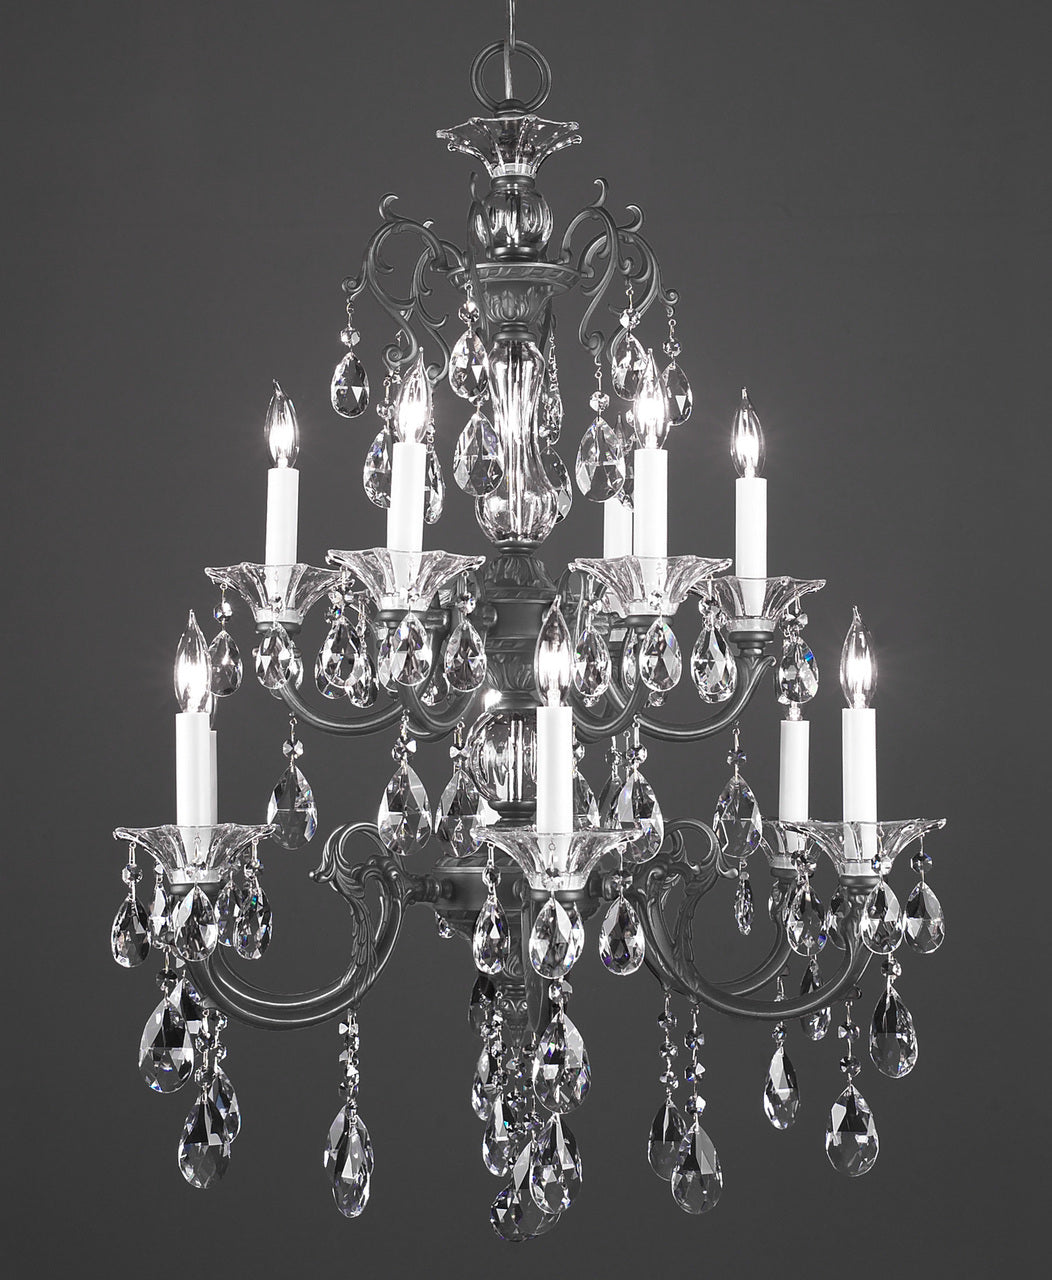 Classic Lighting 57062 SS CBK Via Lombardi Crystal Chandelier in Silverstone (Imported from Spain)